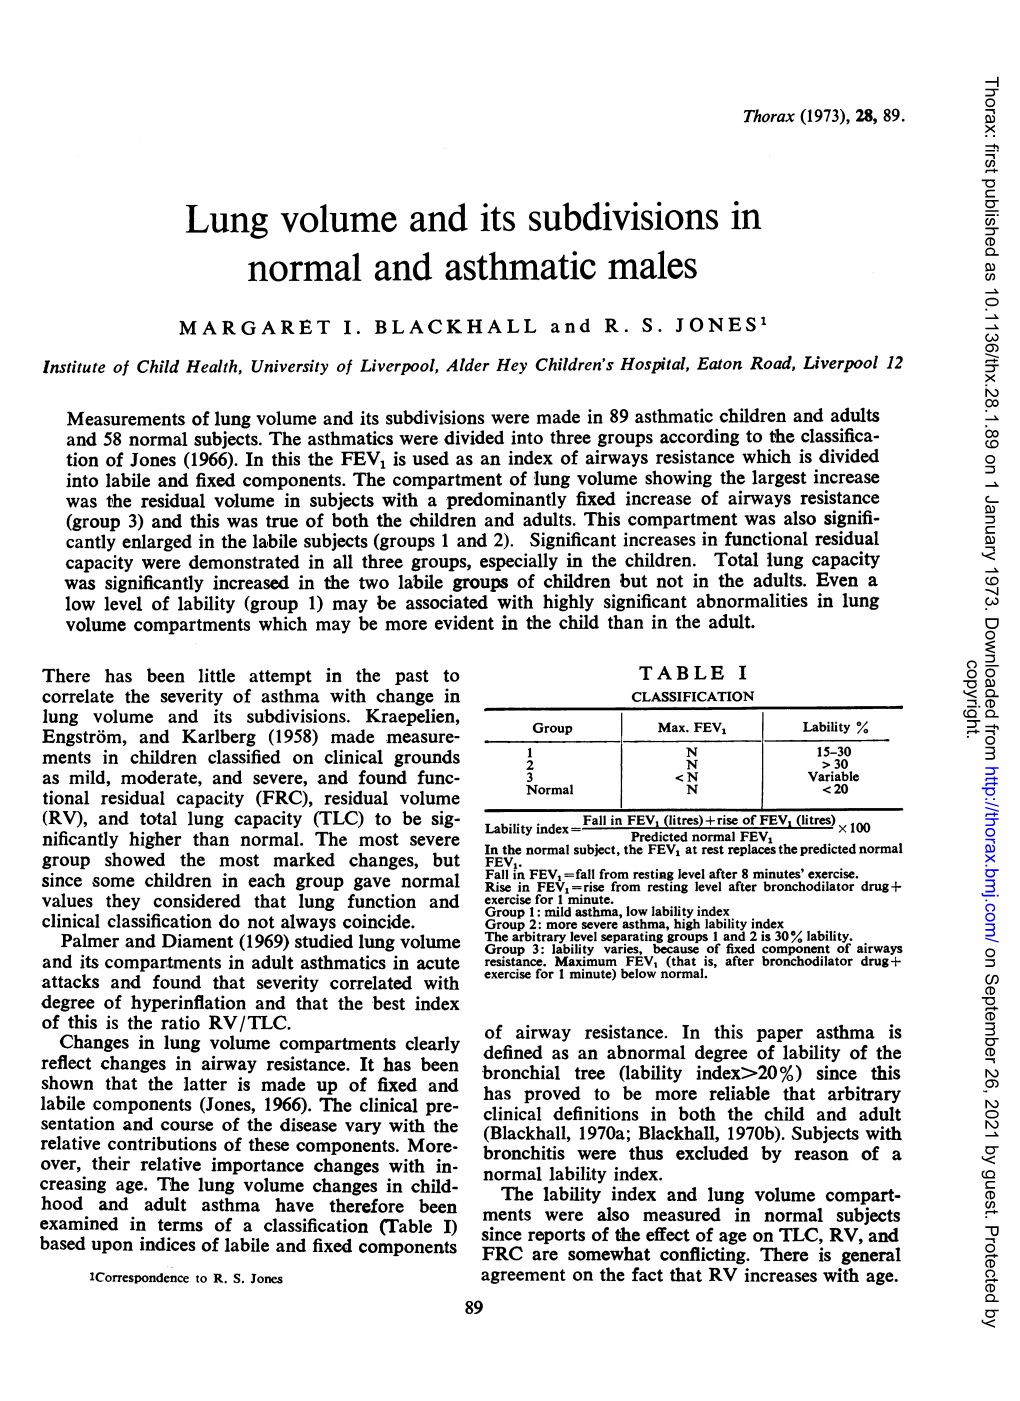 Lung Volume and Its Subdivisions in Normal and Asthmatic Males